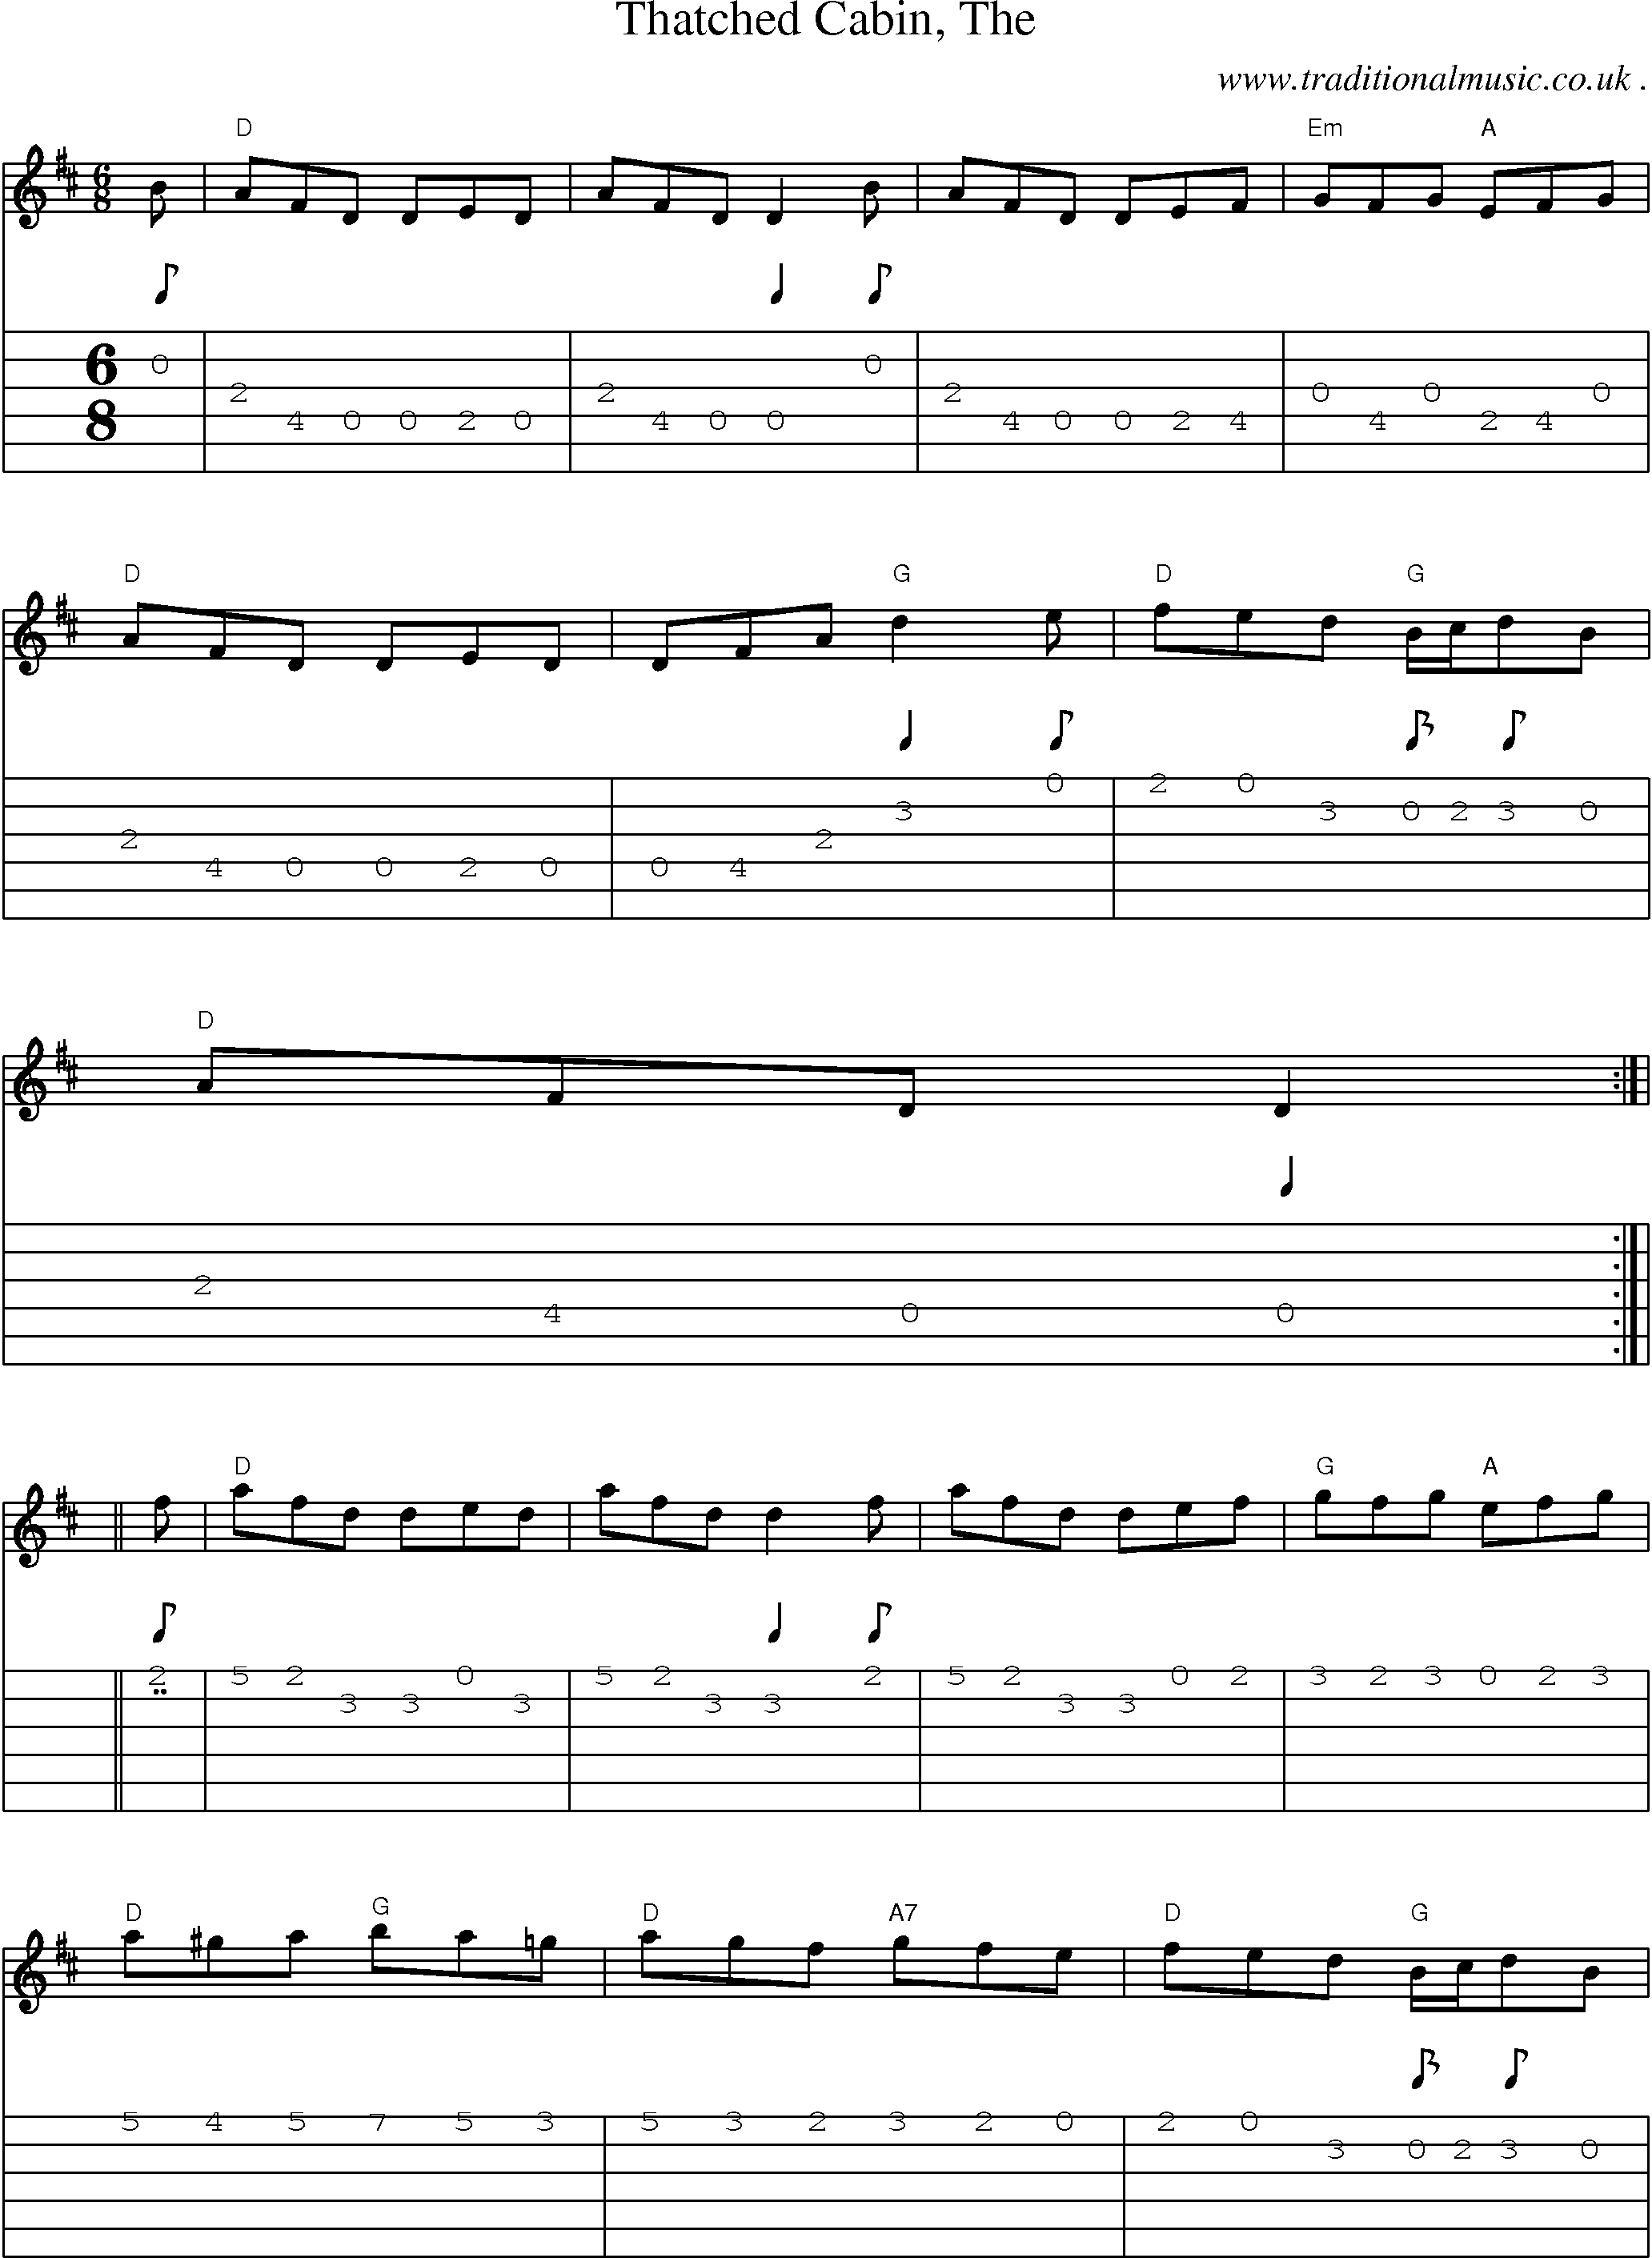 Music Score and Guitar Tabs for Thatched Cabin The